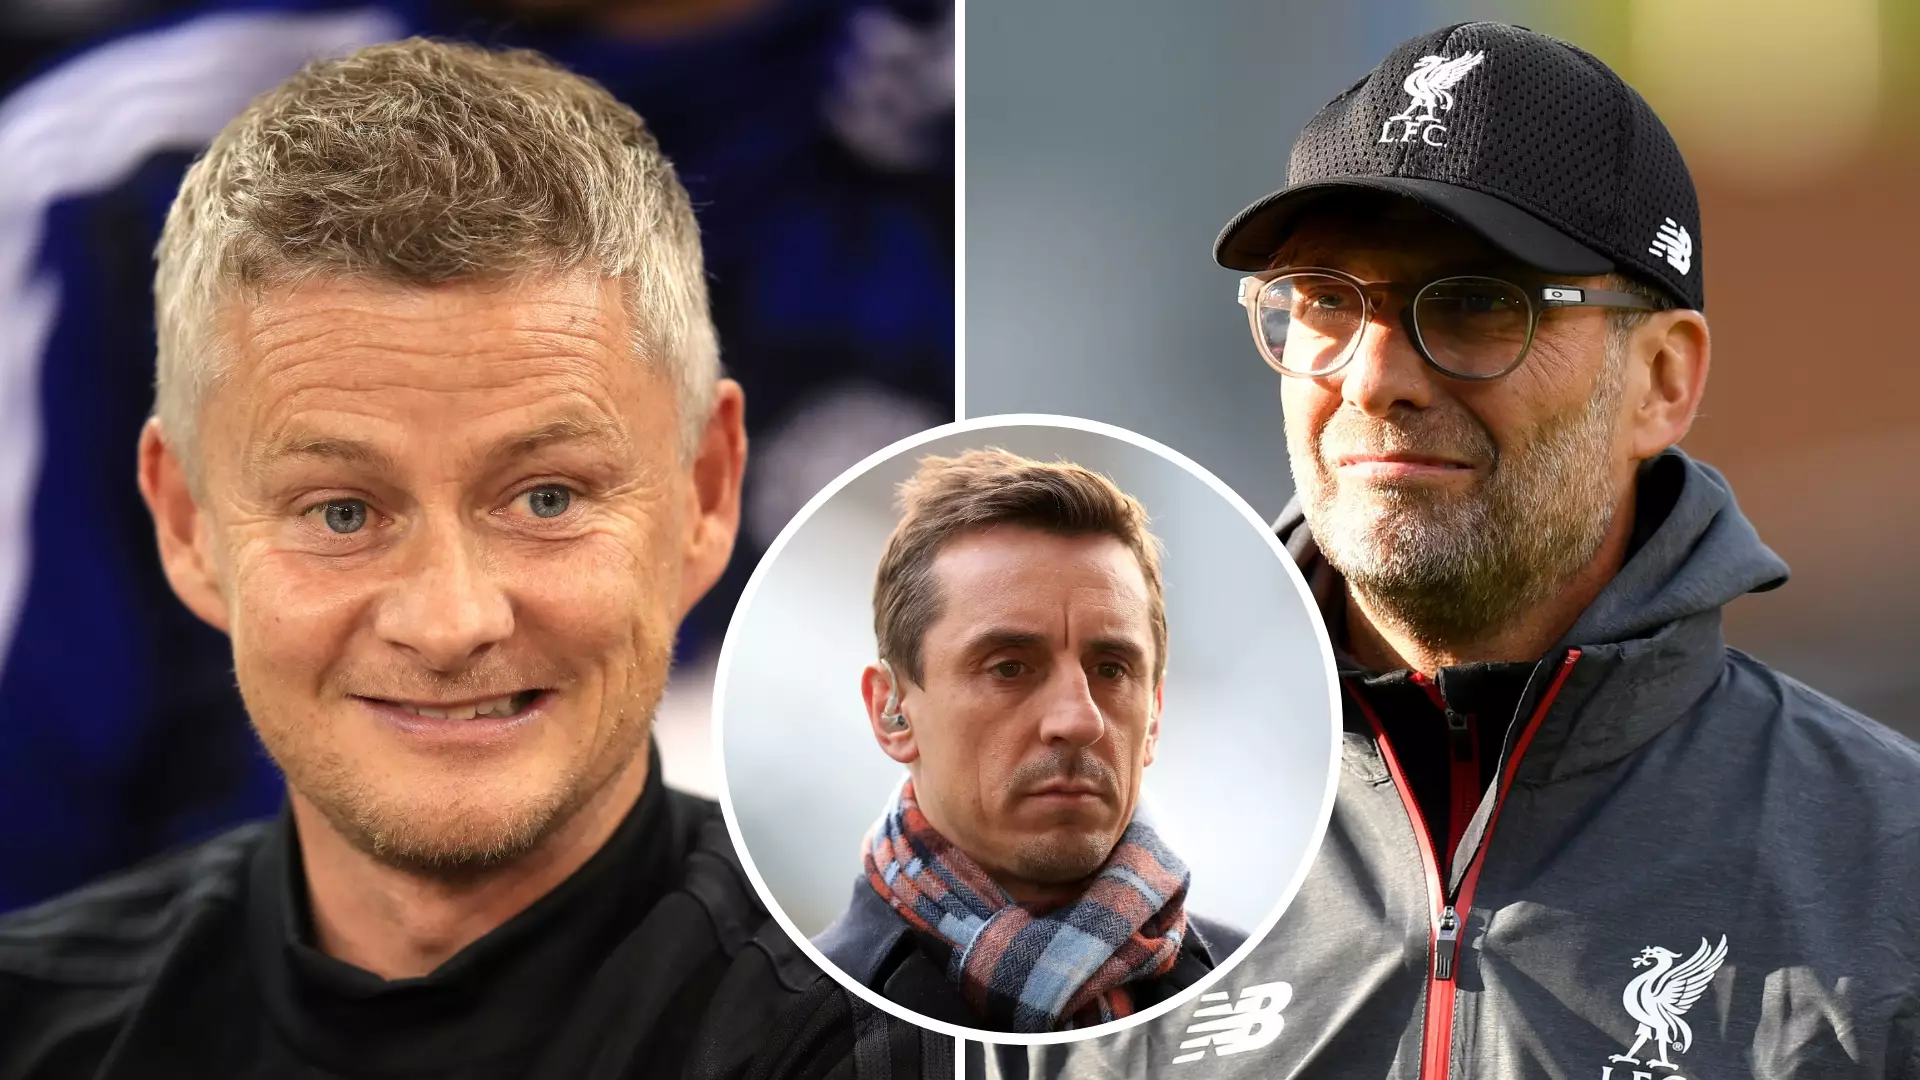 Gary Neville Claims Solskjaer Is Working With A Squad ‘Like The One Klopp Picked Up At Liverpool'